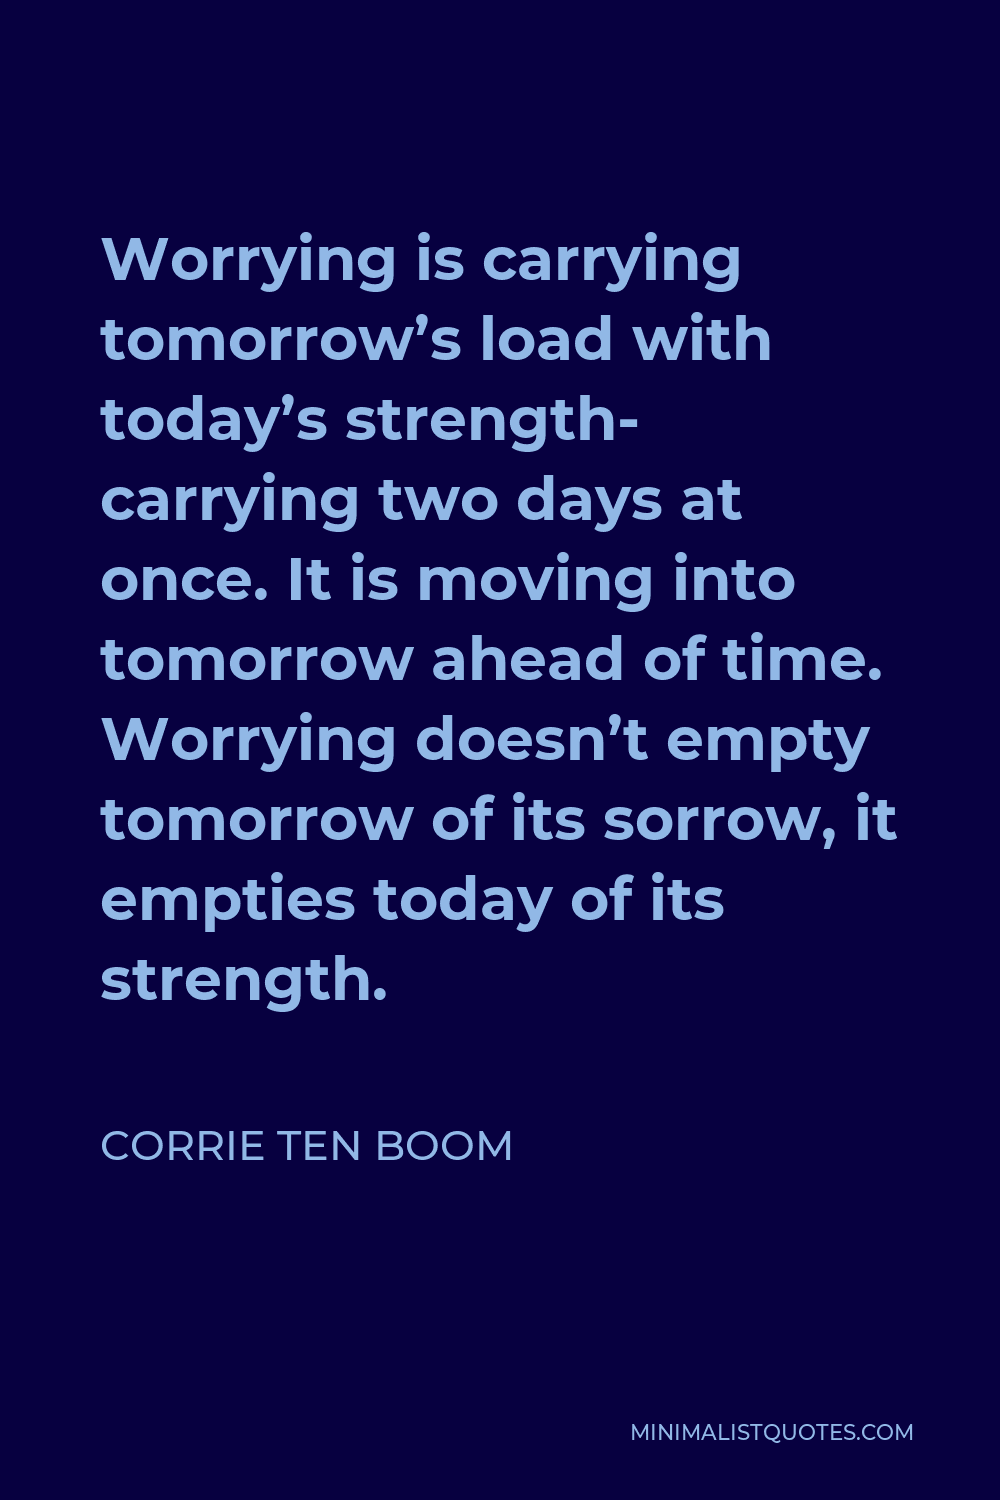 Corrie ten Boom Quote - Worrying is carrying tomorrow’s load with today’s strength- carrying two days at once. It is moving into tomorrow ahead of time. Worrying doesn’t empty tomorrow of its sorrow, it empties today of its strength.